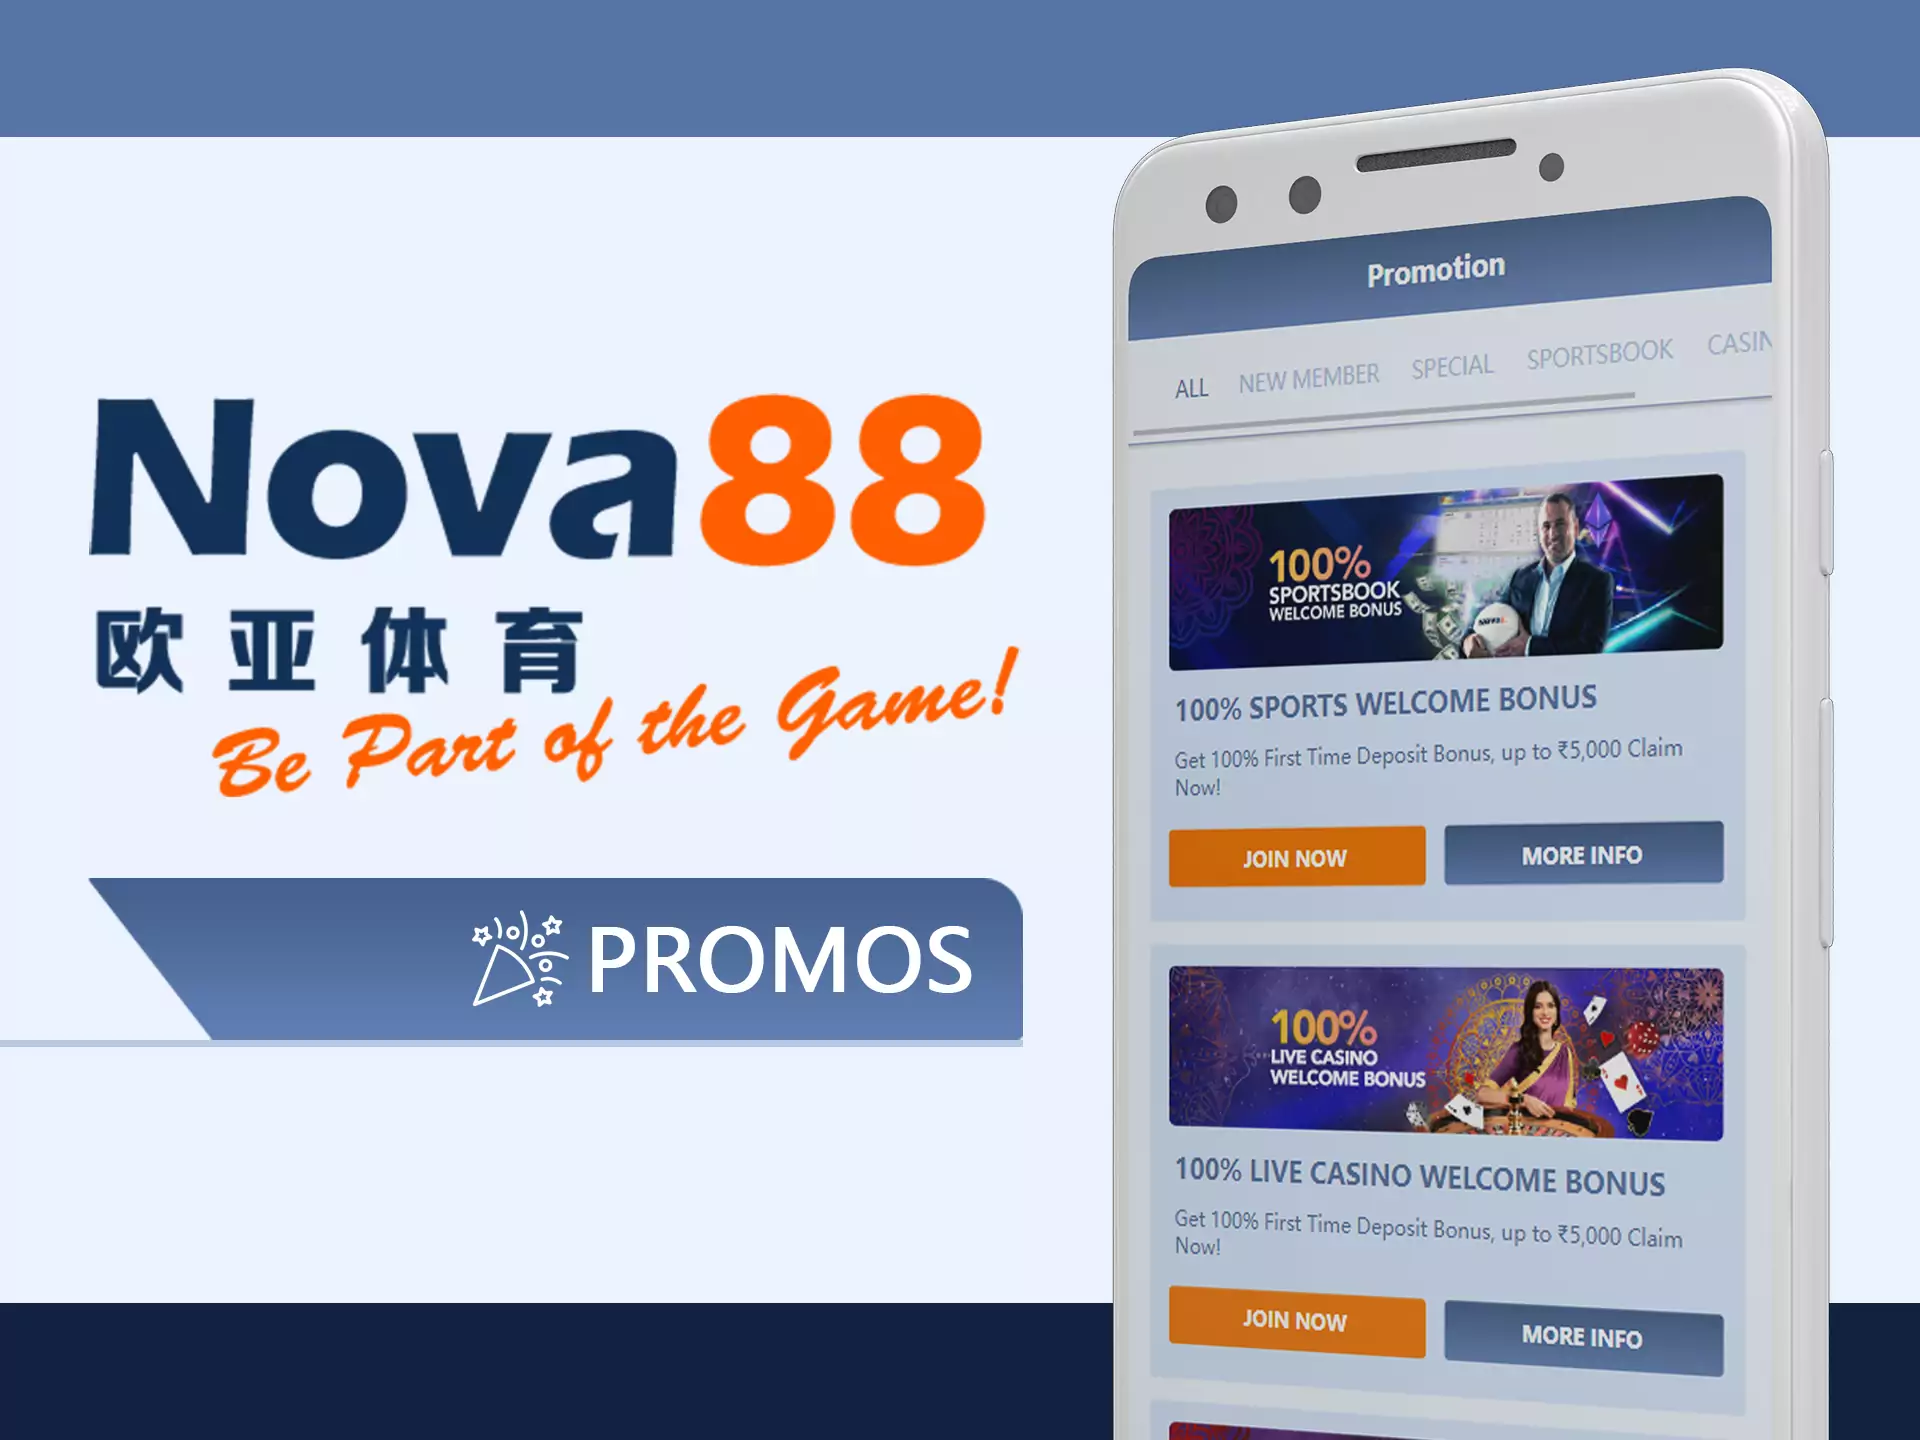 Take advantage of all the bonuses and promotions in Nova88 app.